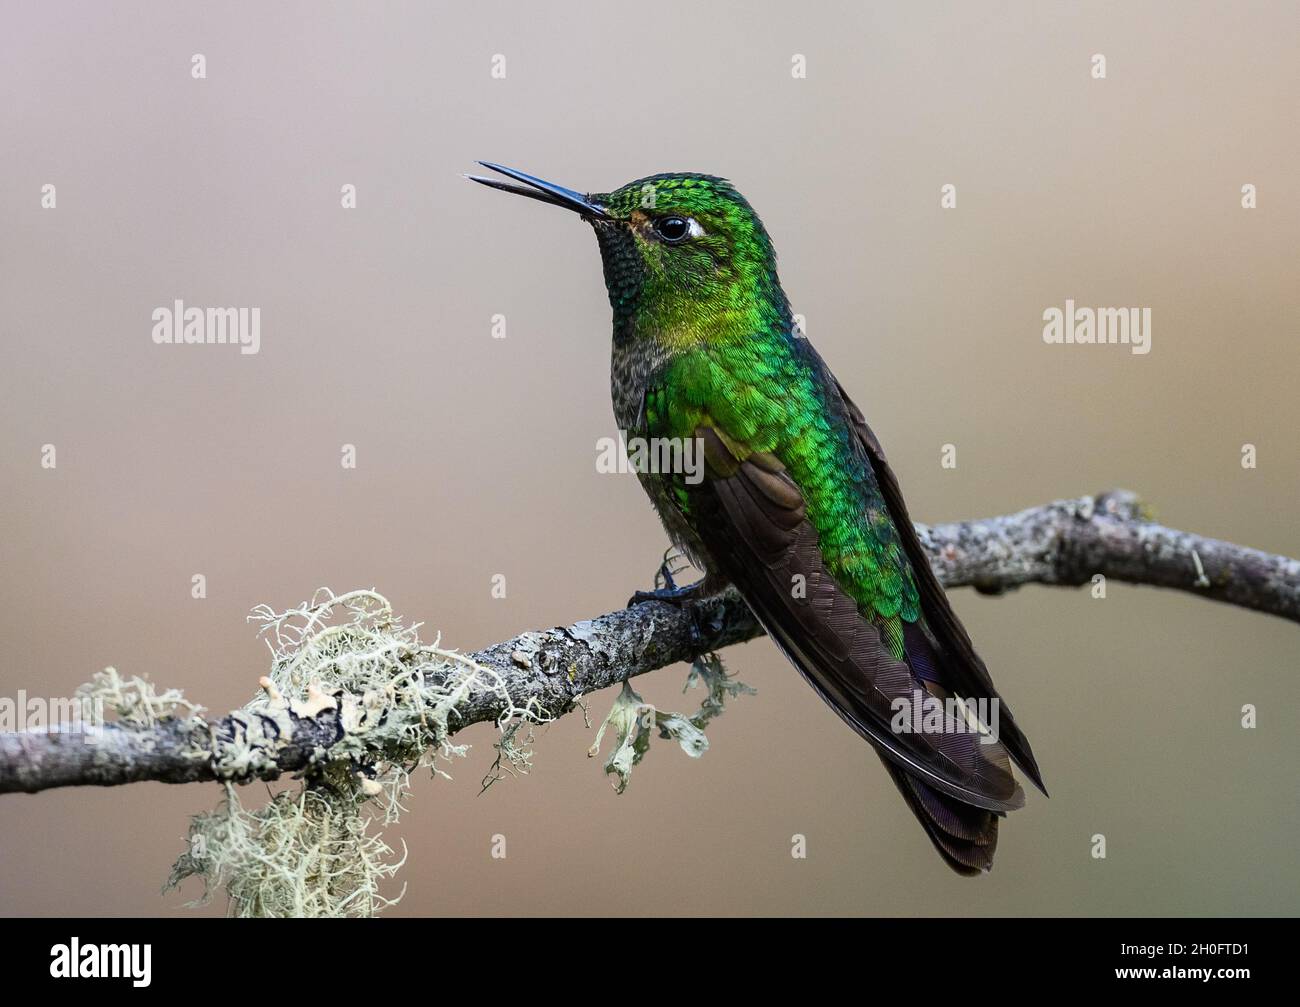 A Tyrian Metaltail (Metallura tyrianthina) hummingbird with shinning green plumge perched on a branch. Cuzco, Peru, South America. Stock Photo